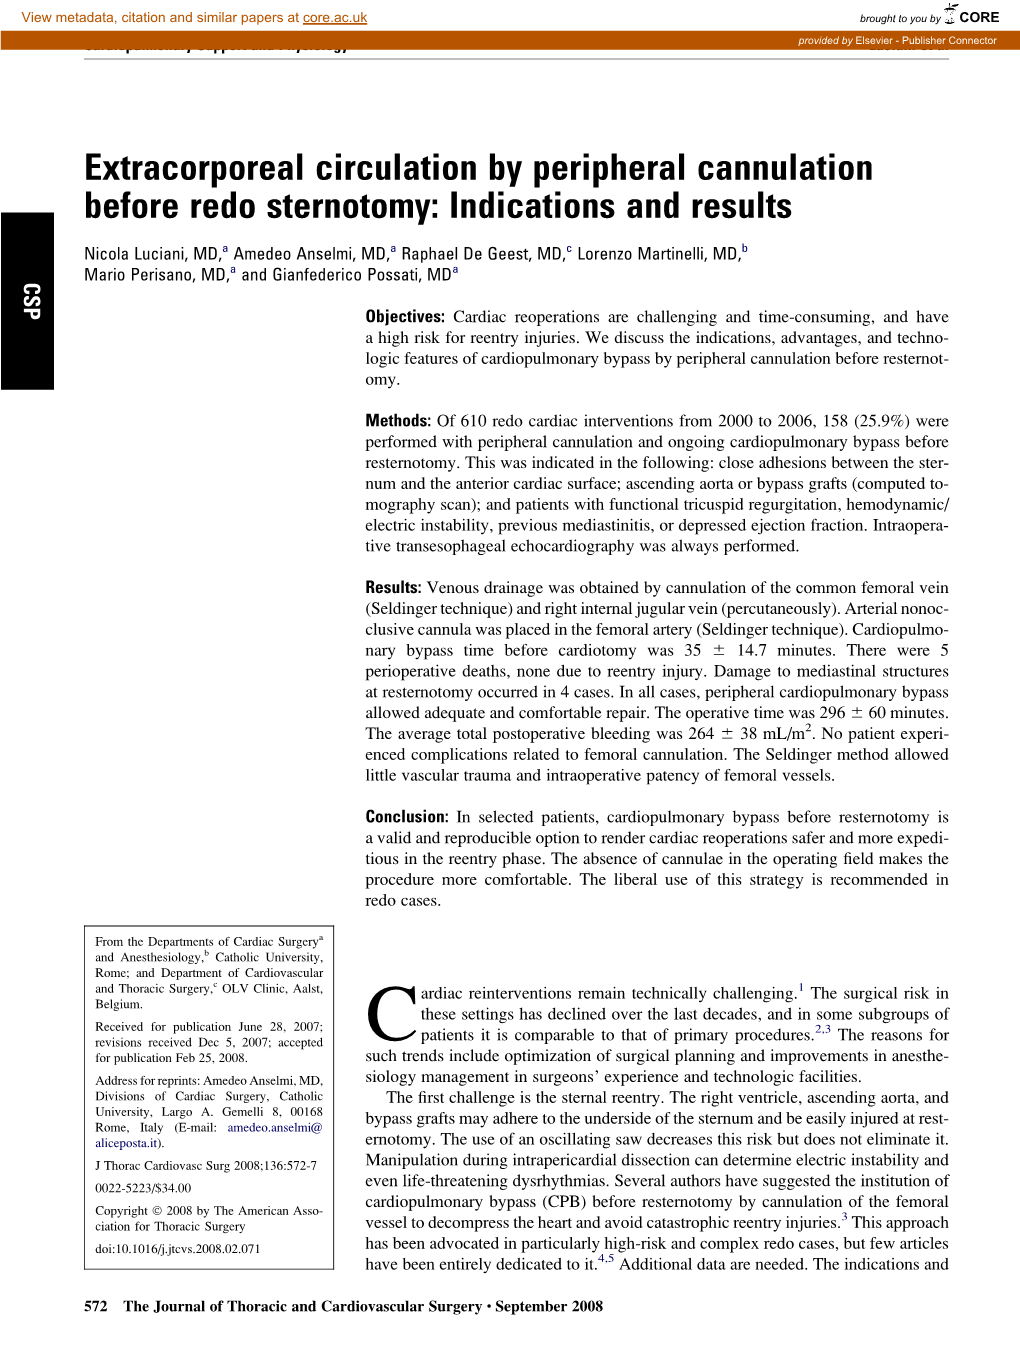 Extracorporeal Circulation by Peripheral Cannulation Before Redo Sternotomy: Indications and Results